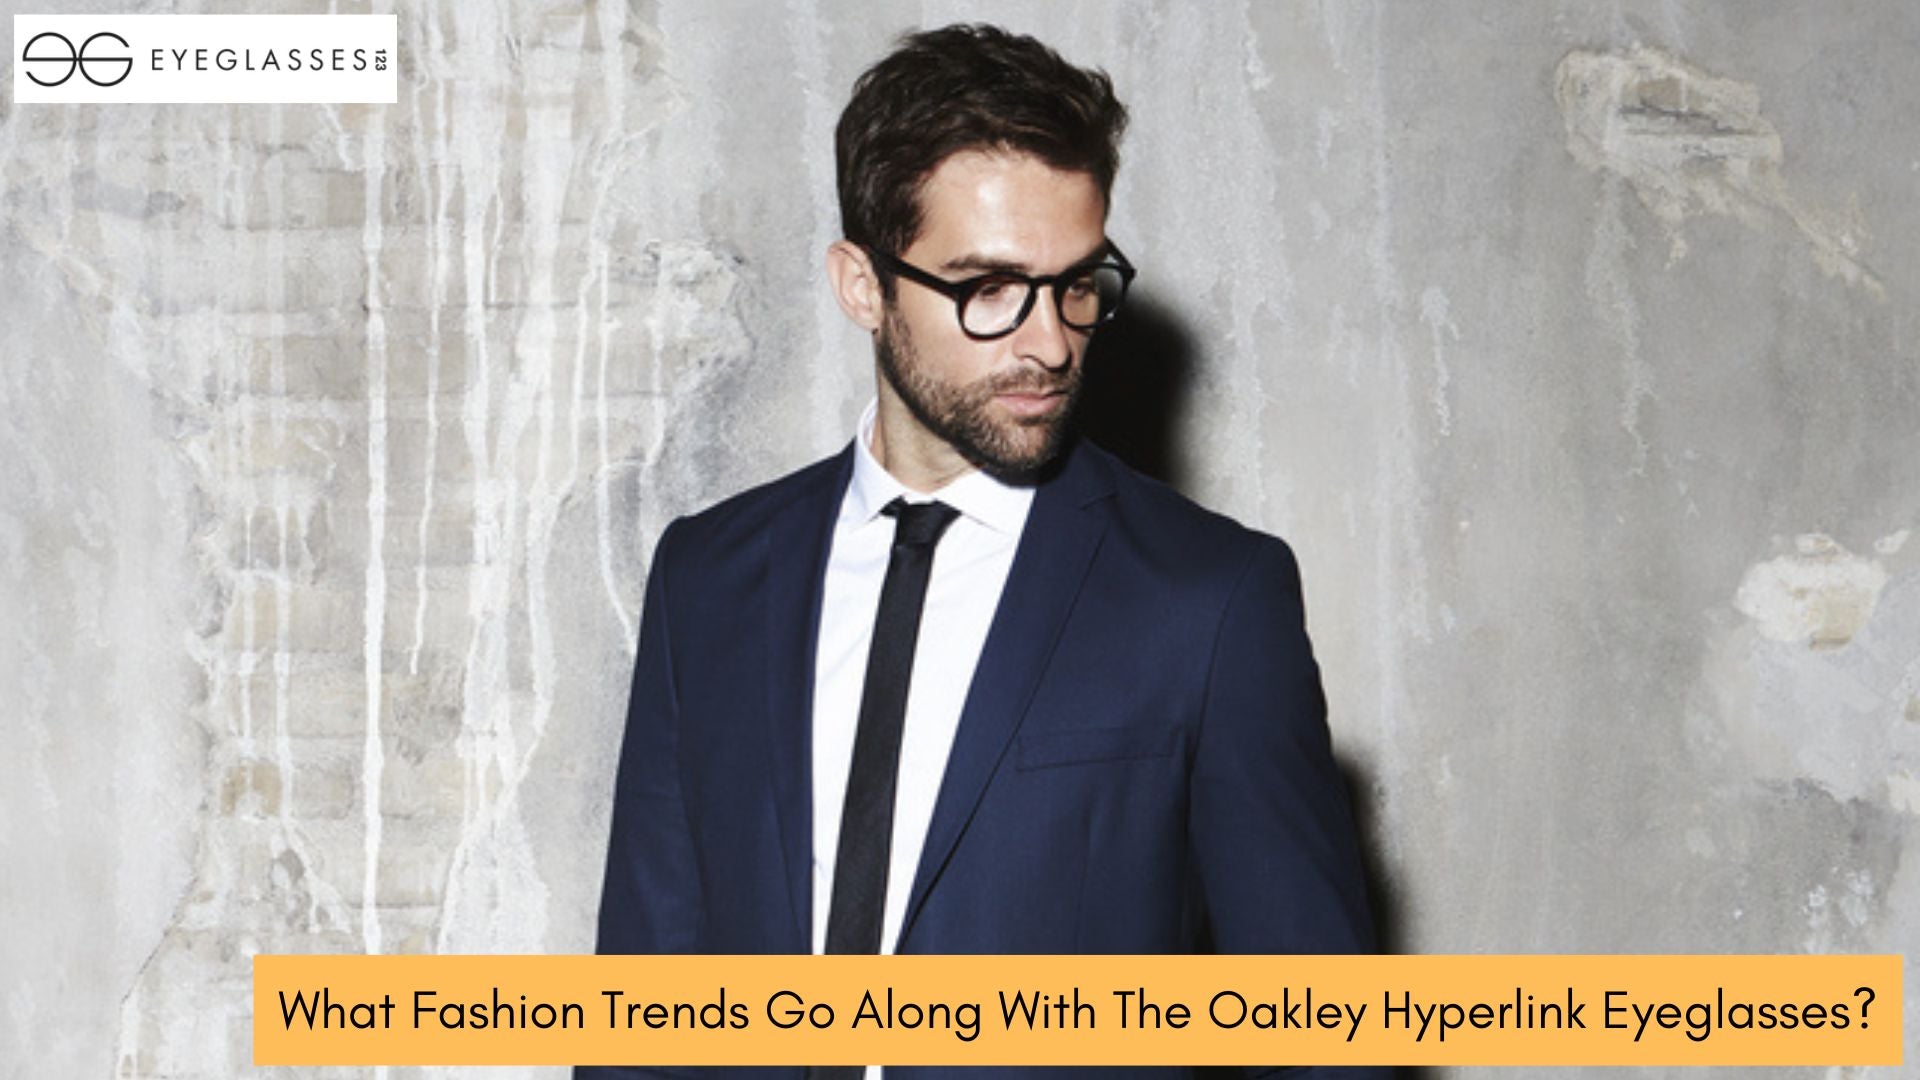 What Fashion Trends Go Along With The Oakley Hyperlink Eyeglasses?